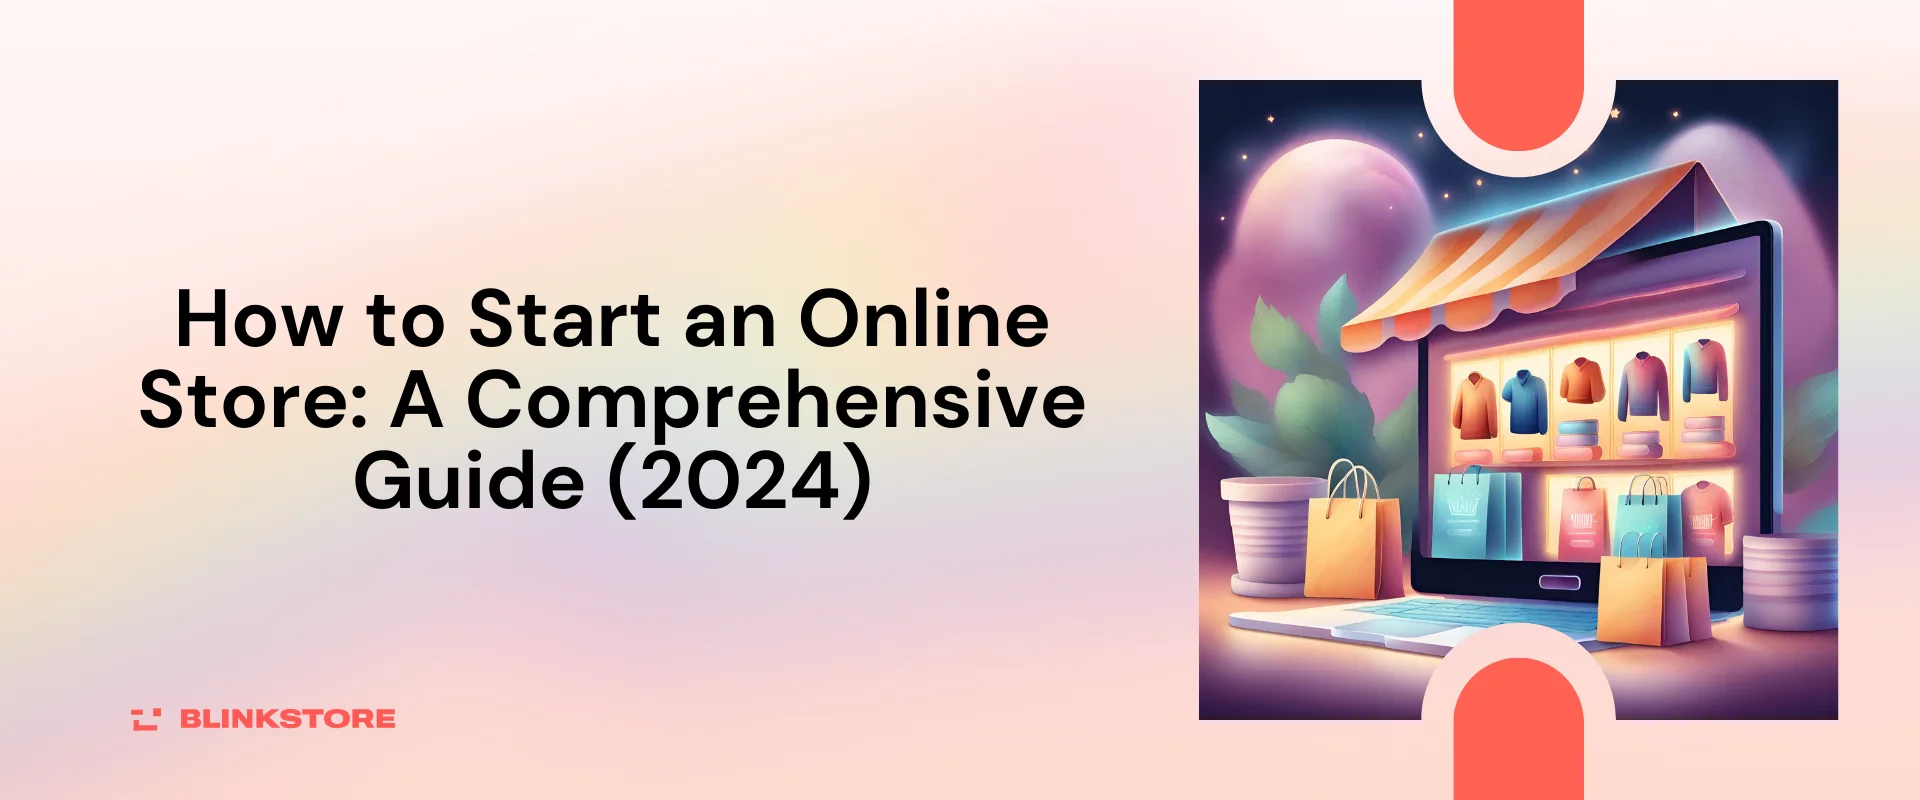 How to Start an Online Store: A Comprehensive Guide (2024)